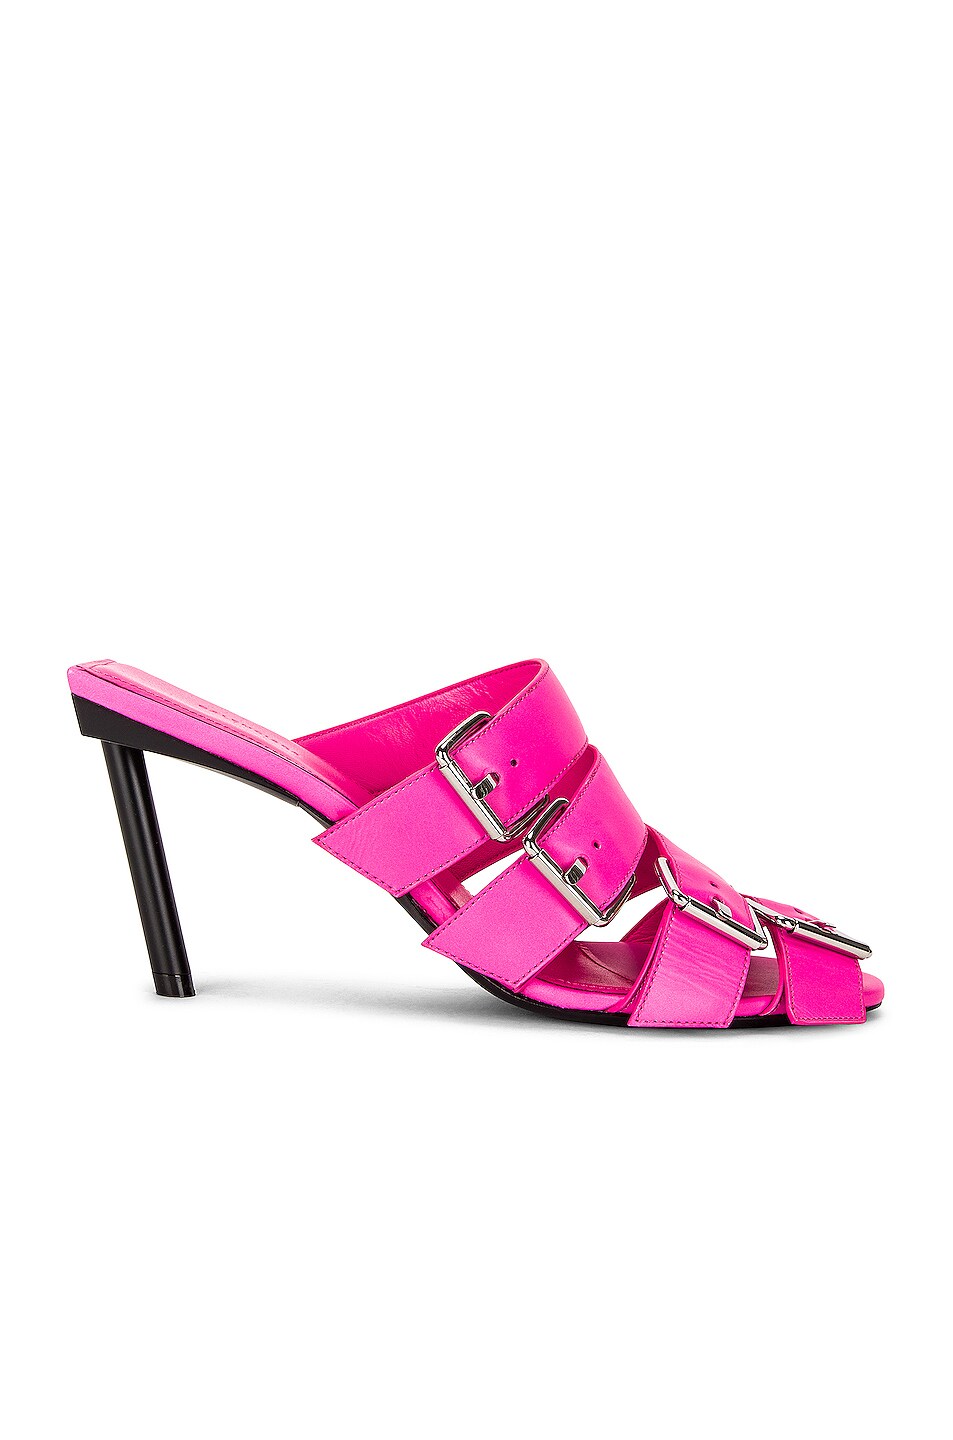 Image 1 of Balenciaga Buckle Knife Sandals in Fluo Pink & Silver